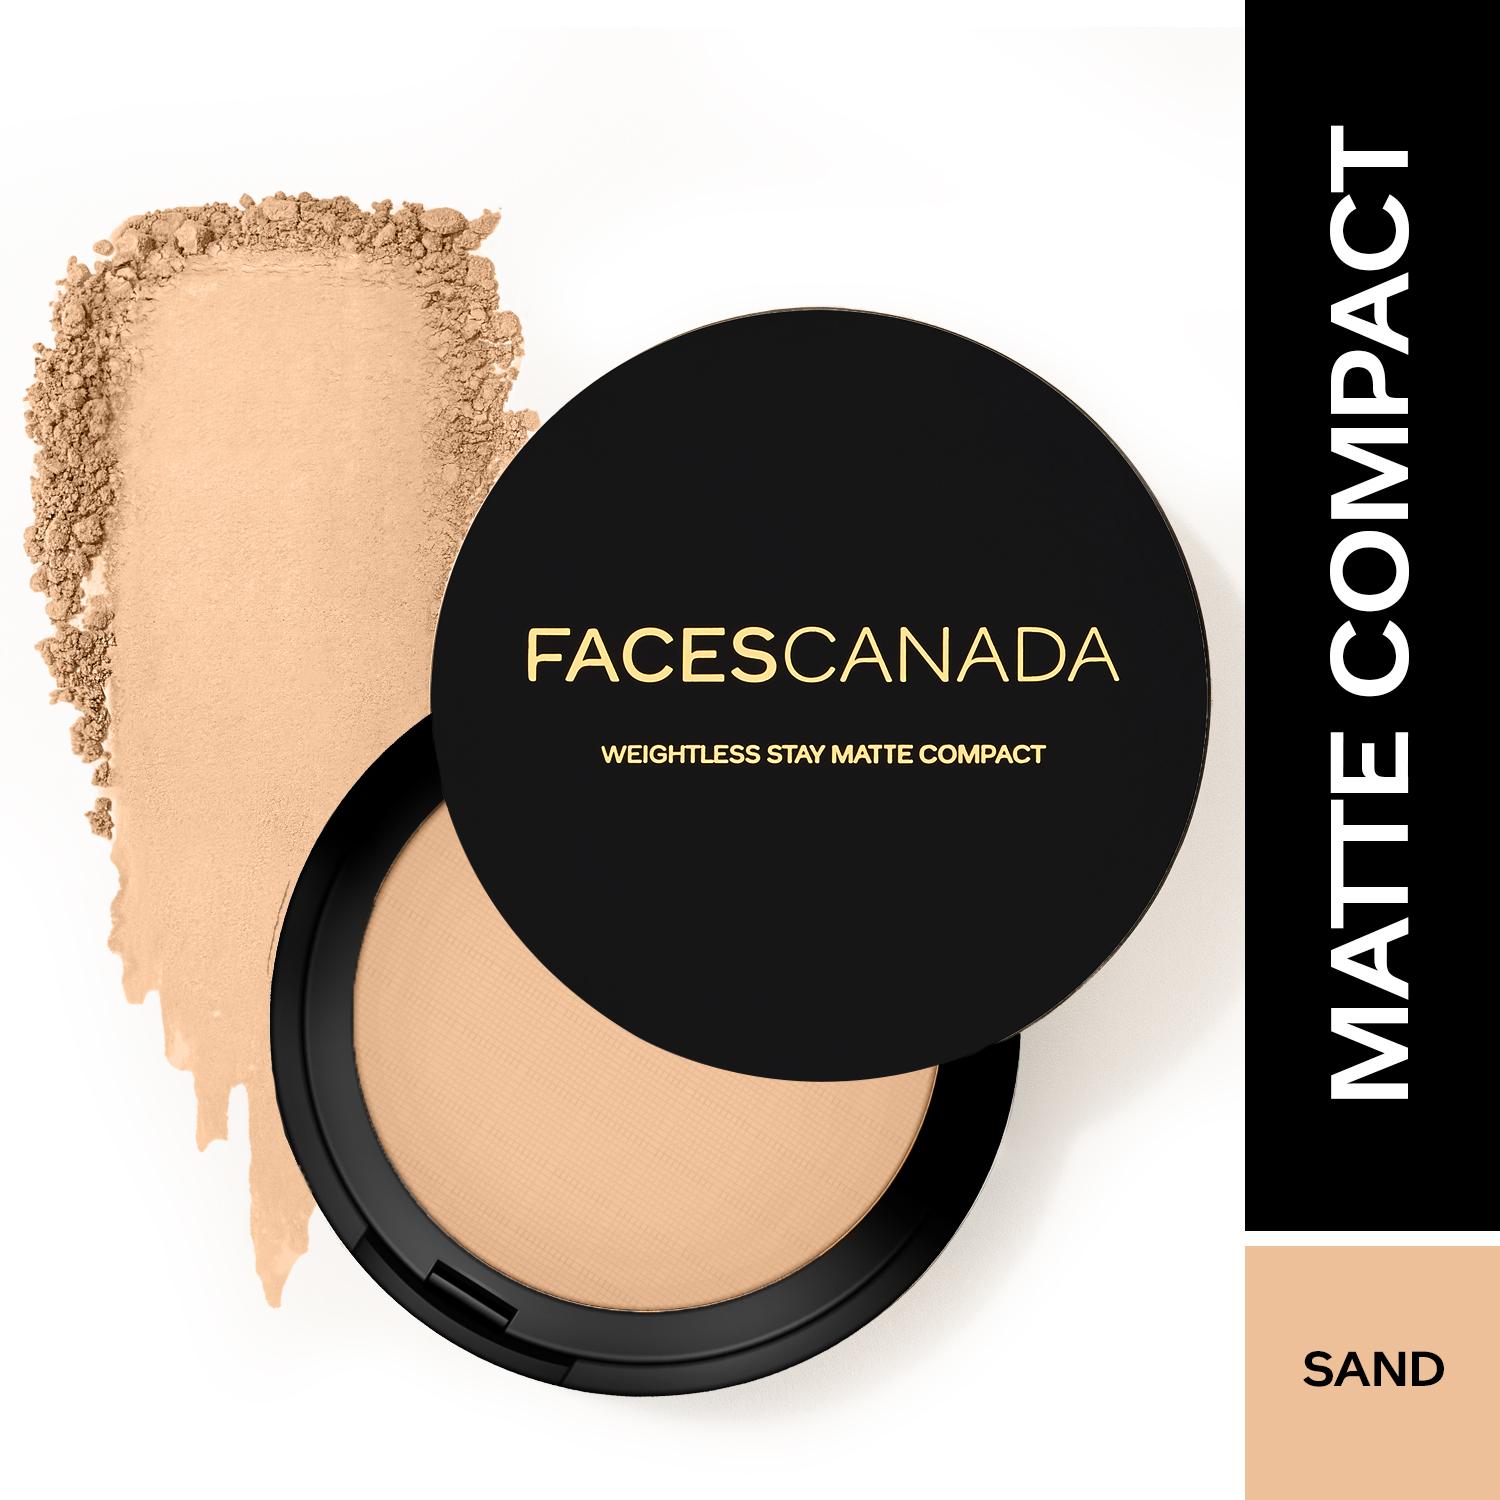 Faces Canada | Faces Canada Weightless Stay Matte Finish Compact Powder,Non Oily Matte Pressed Powder -Sand (9 g)